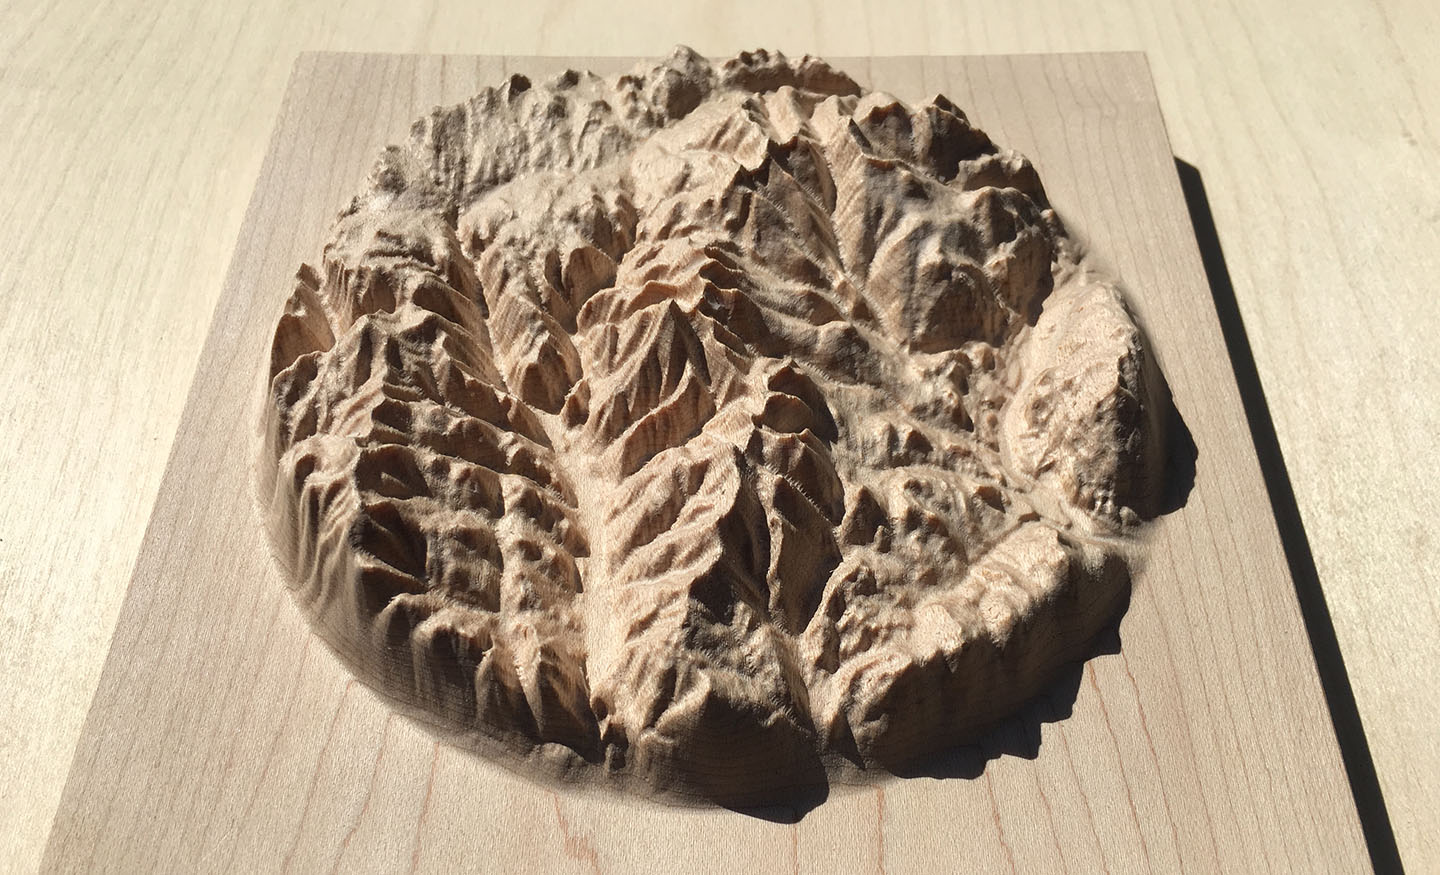 three-dimensional wood-carved relief map of the mountains of the Rossland Range in the Kootenays, British Columbia, Canada